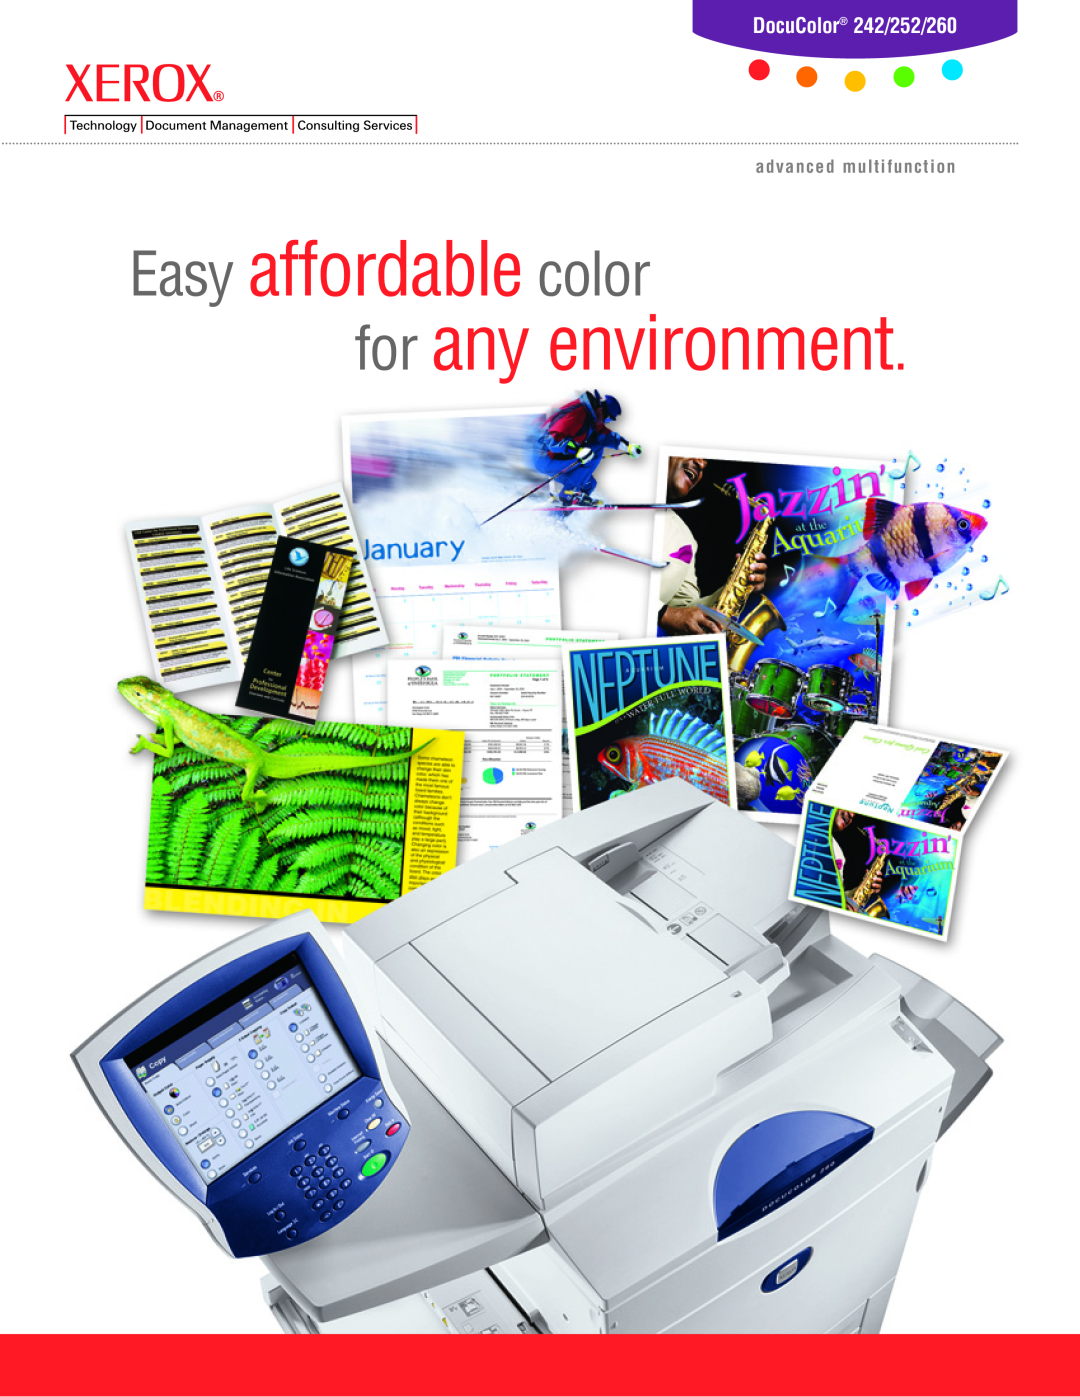 Xerox manual Easy affordable color for any environment, DocuColor 242/252/260, advanced multifunction 